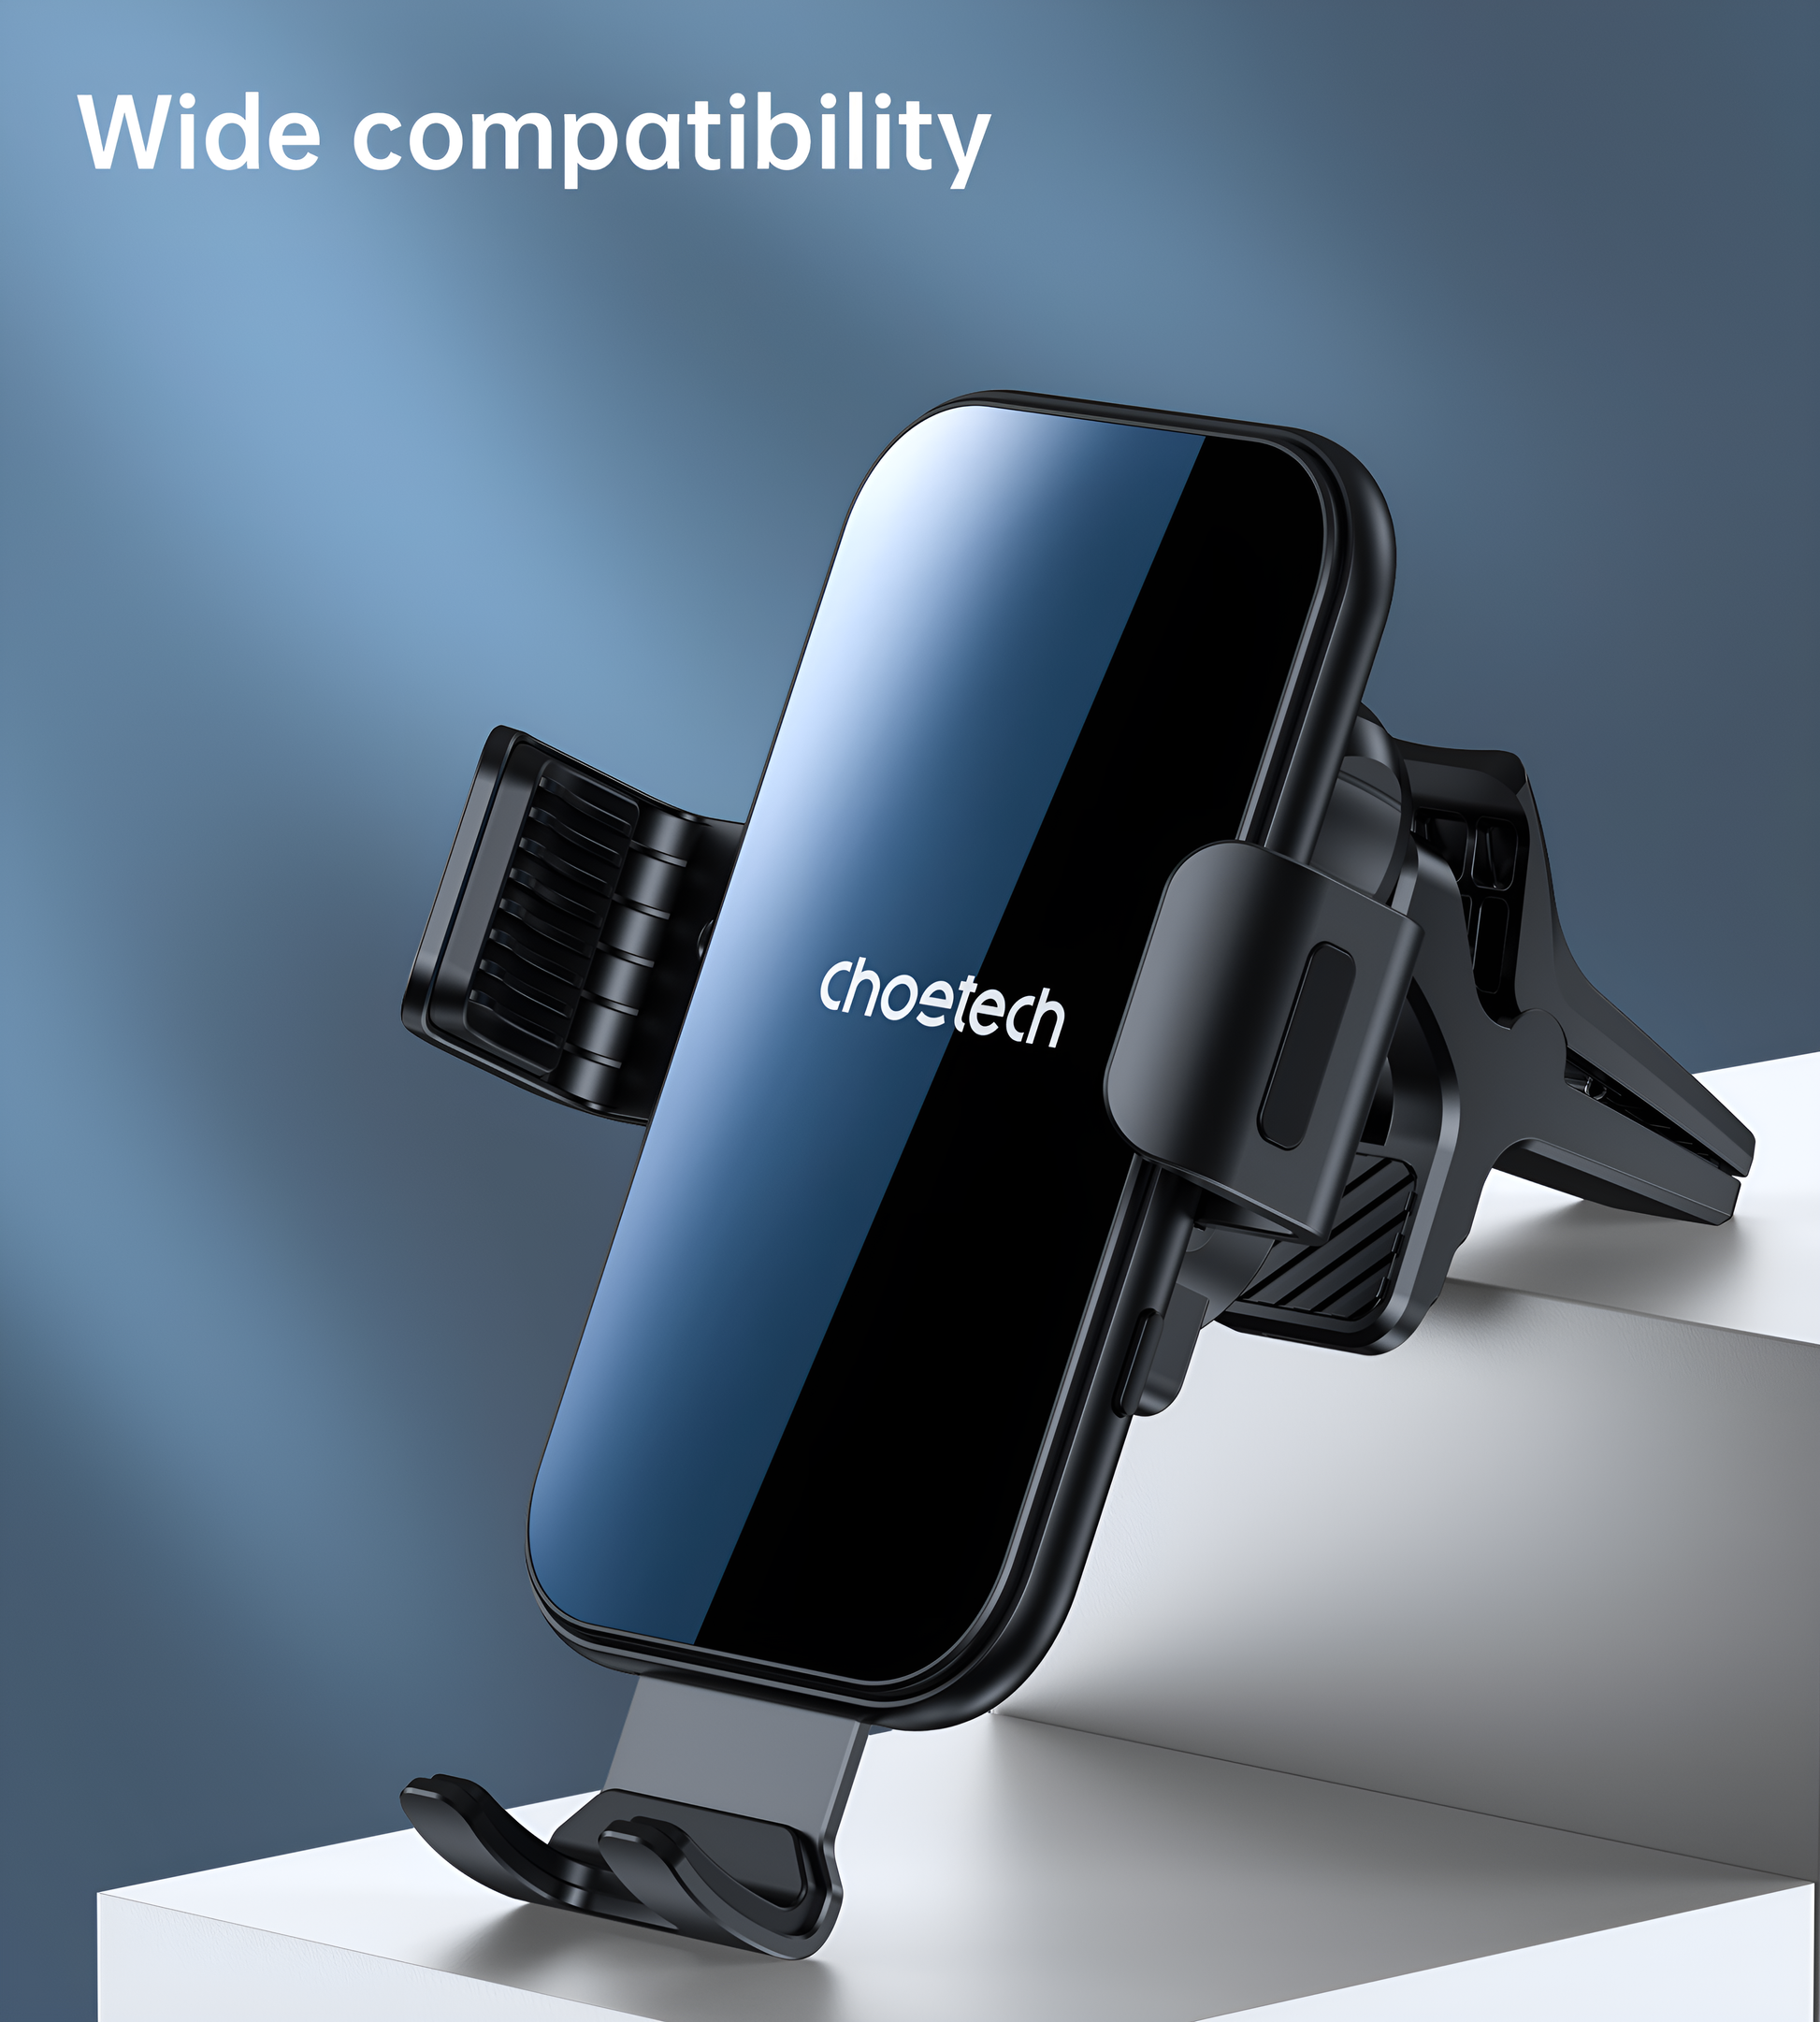 Choetech 10W Dashboard Mount Magnetic Wireless Car Charger for Iphone, T201-F by jcbl accessories. Wide compatibility